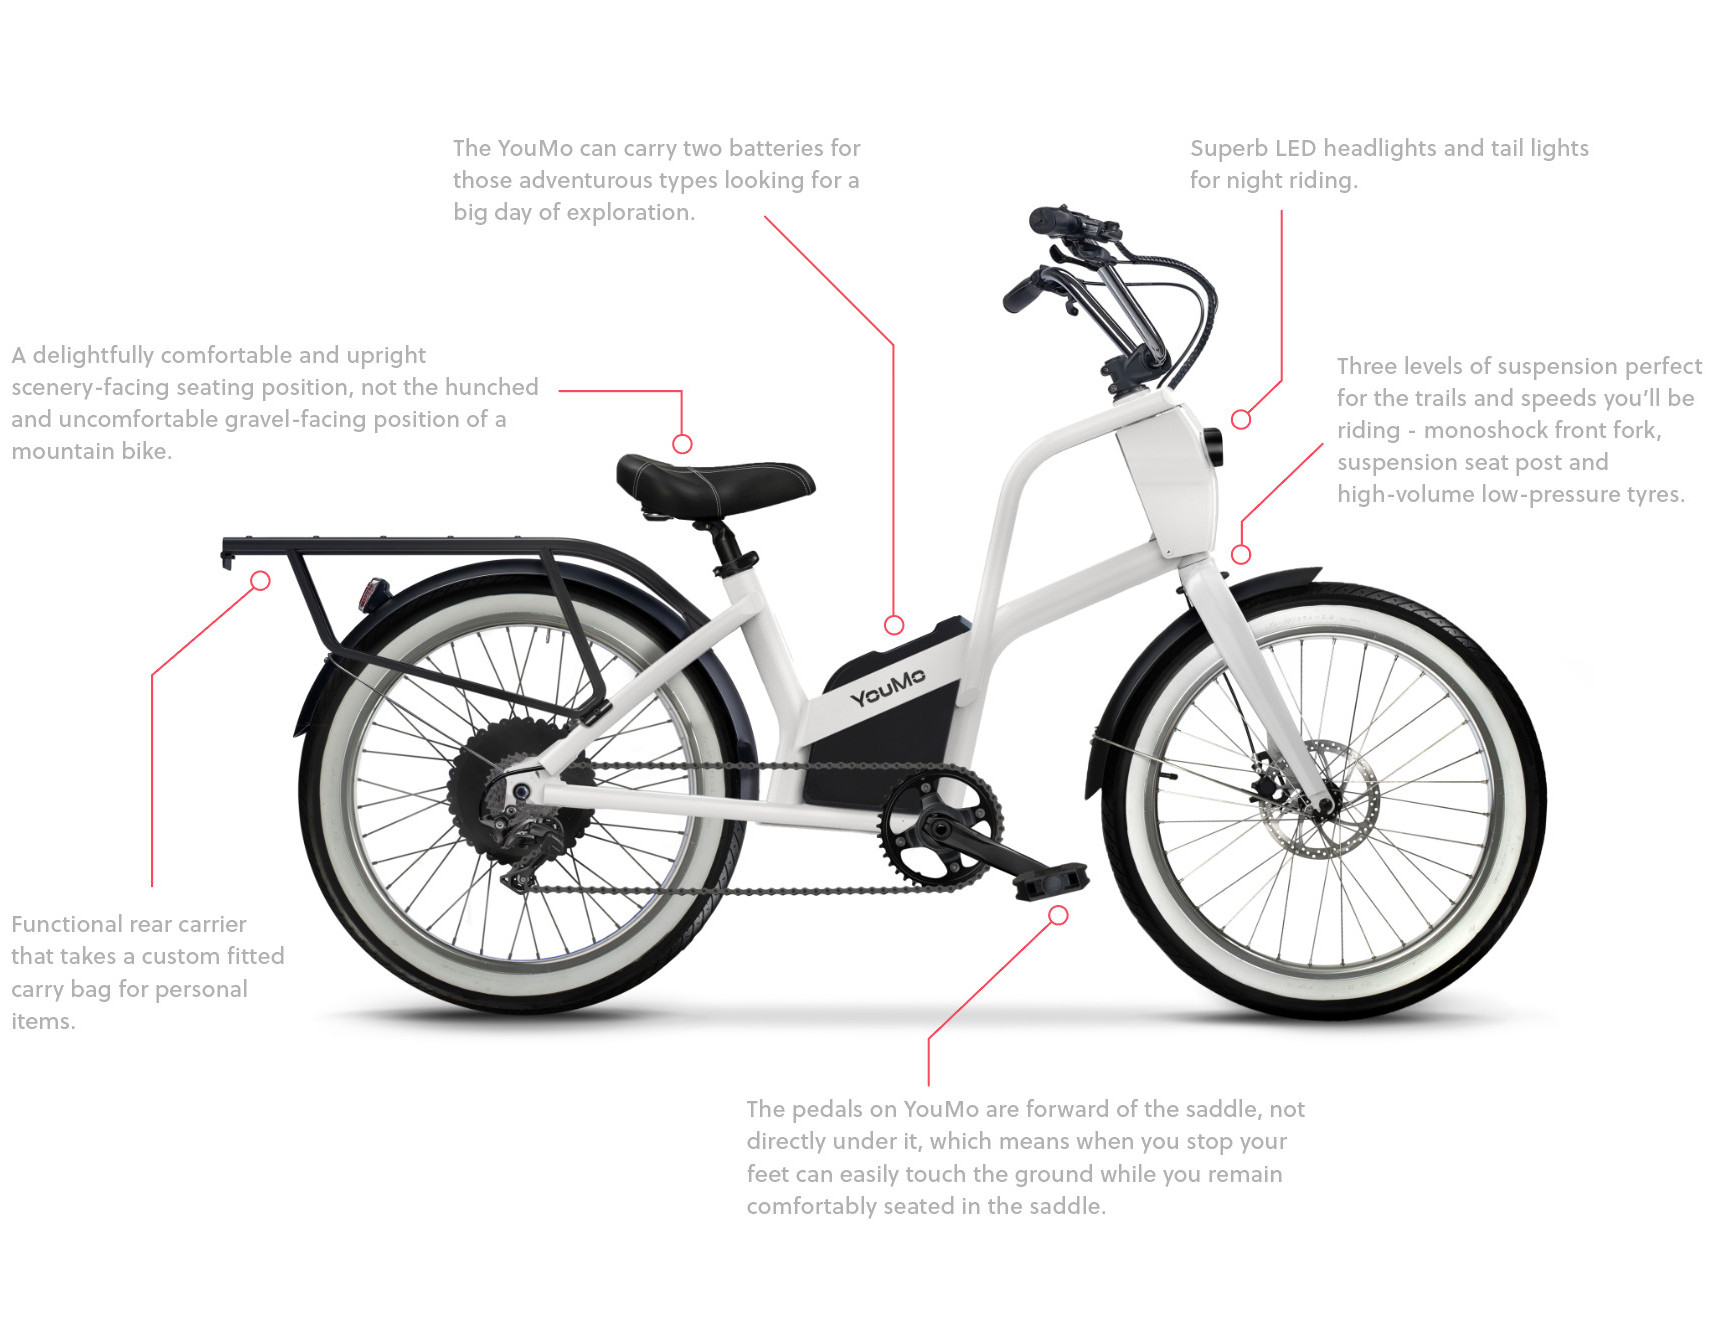 Features of the YouMo electric bike